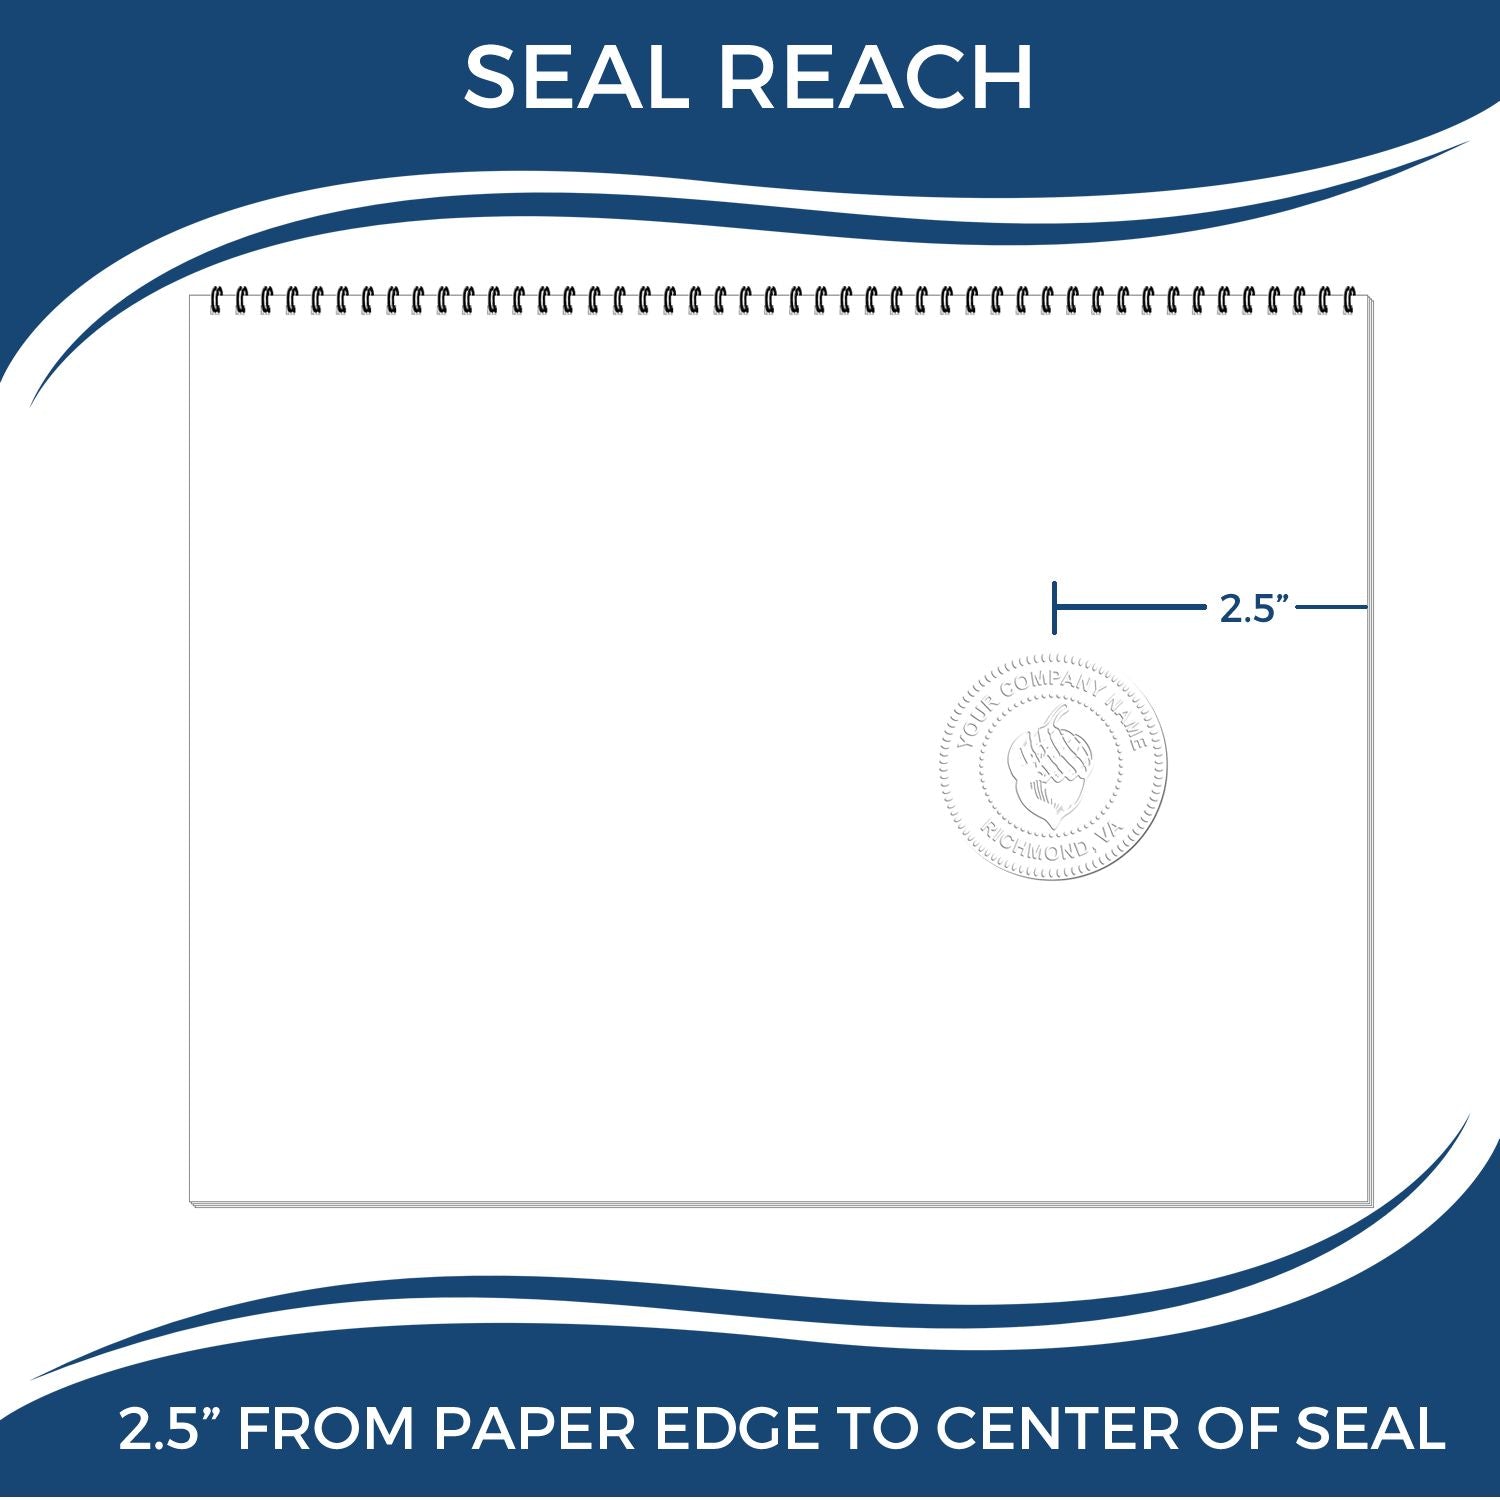 An infographic showing the seal reach which is represented by a ruler and a miniature seal image of the Heavy Duty Cast Iron Alabama Land Surveyor Seal Embosser